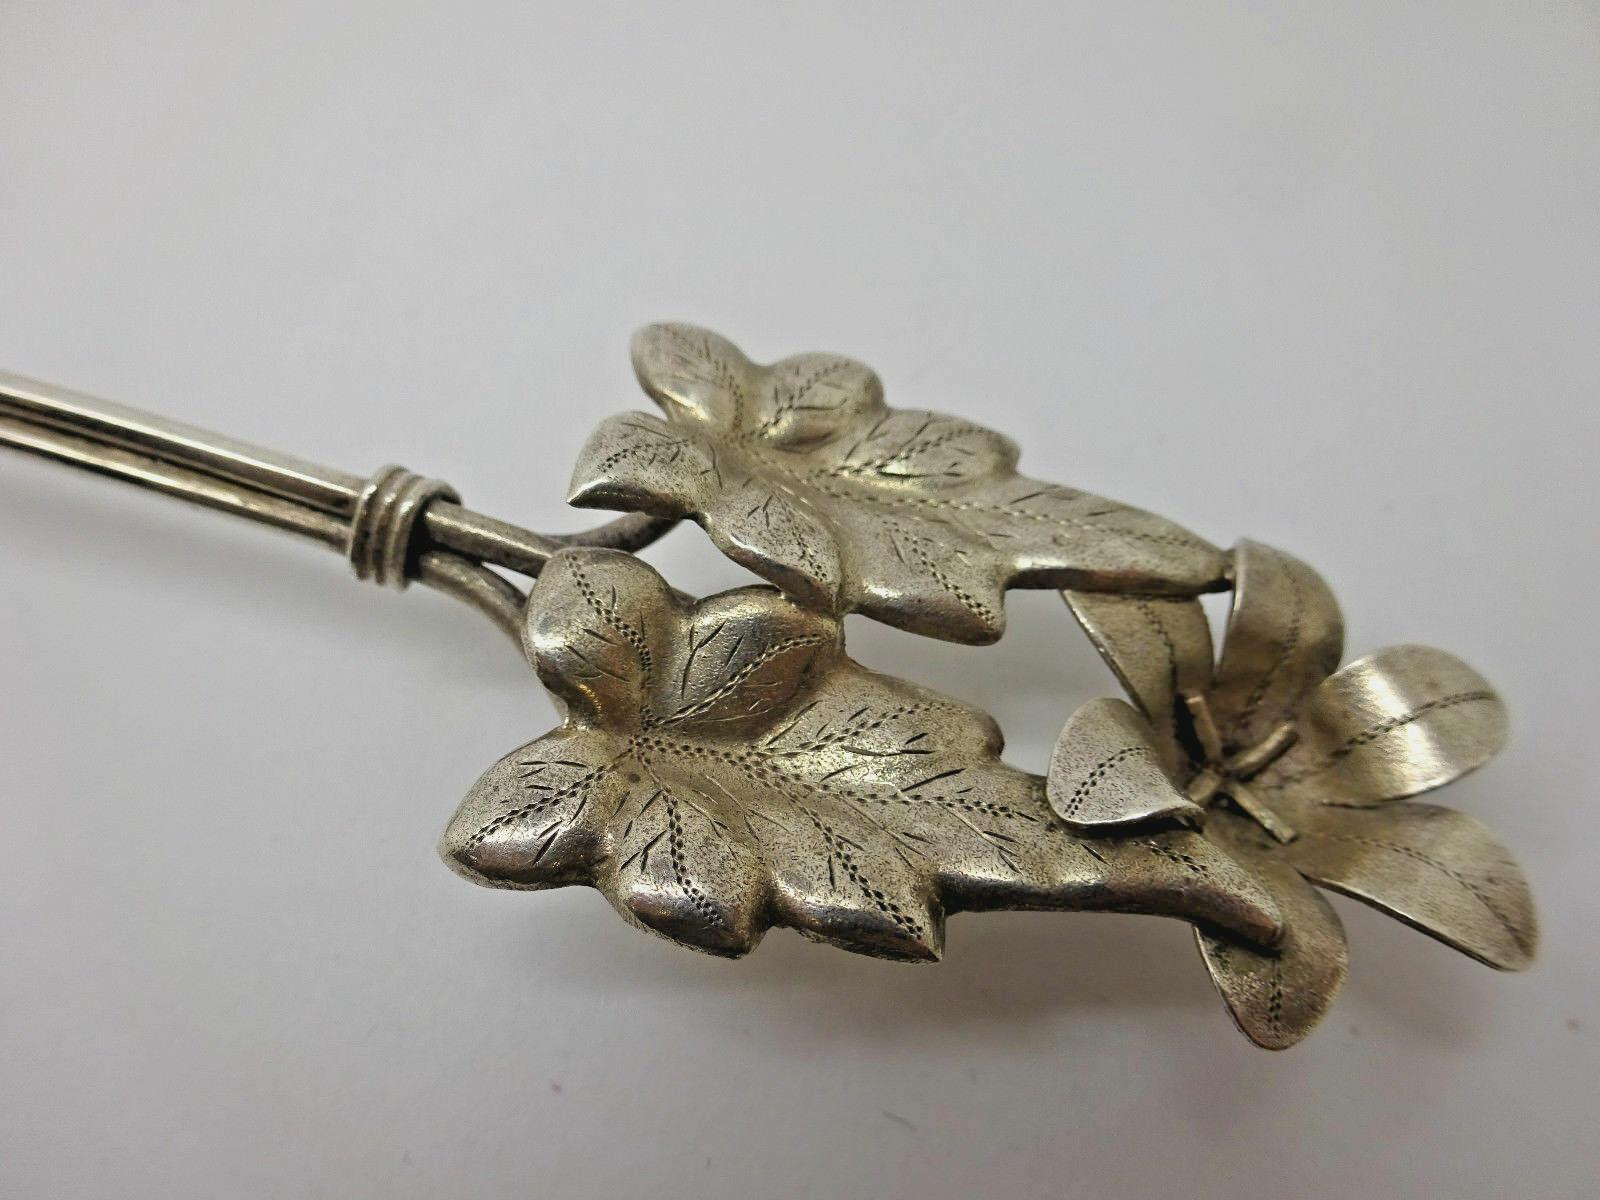 20th Century Art Silver Coin Silver 3D Flower Berry Spoon Bright-Cut circa 1865 GW Unmarked